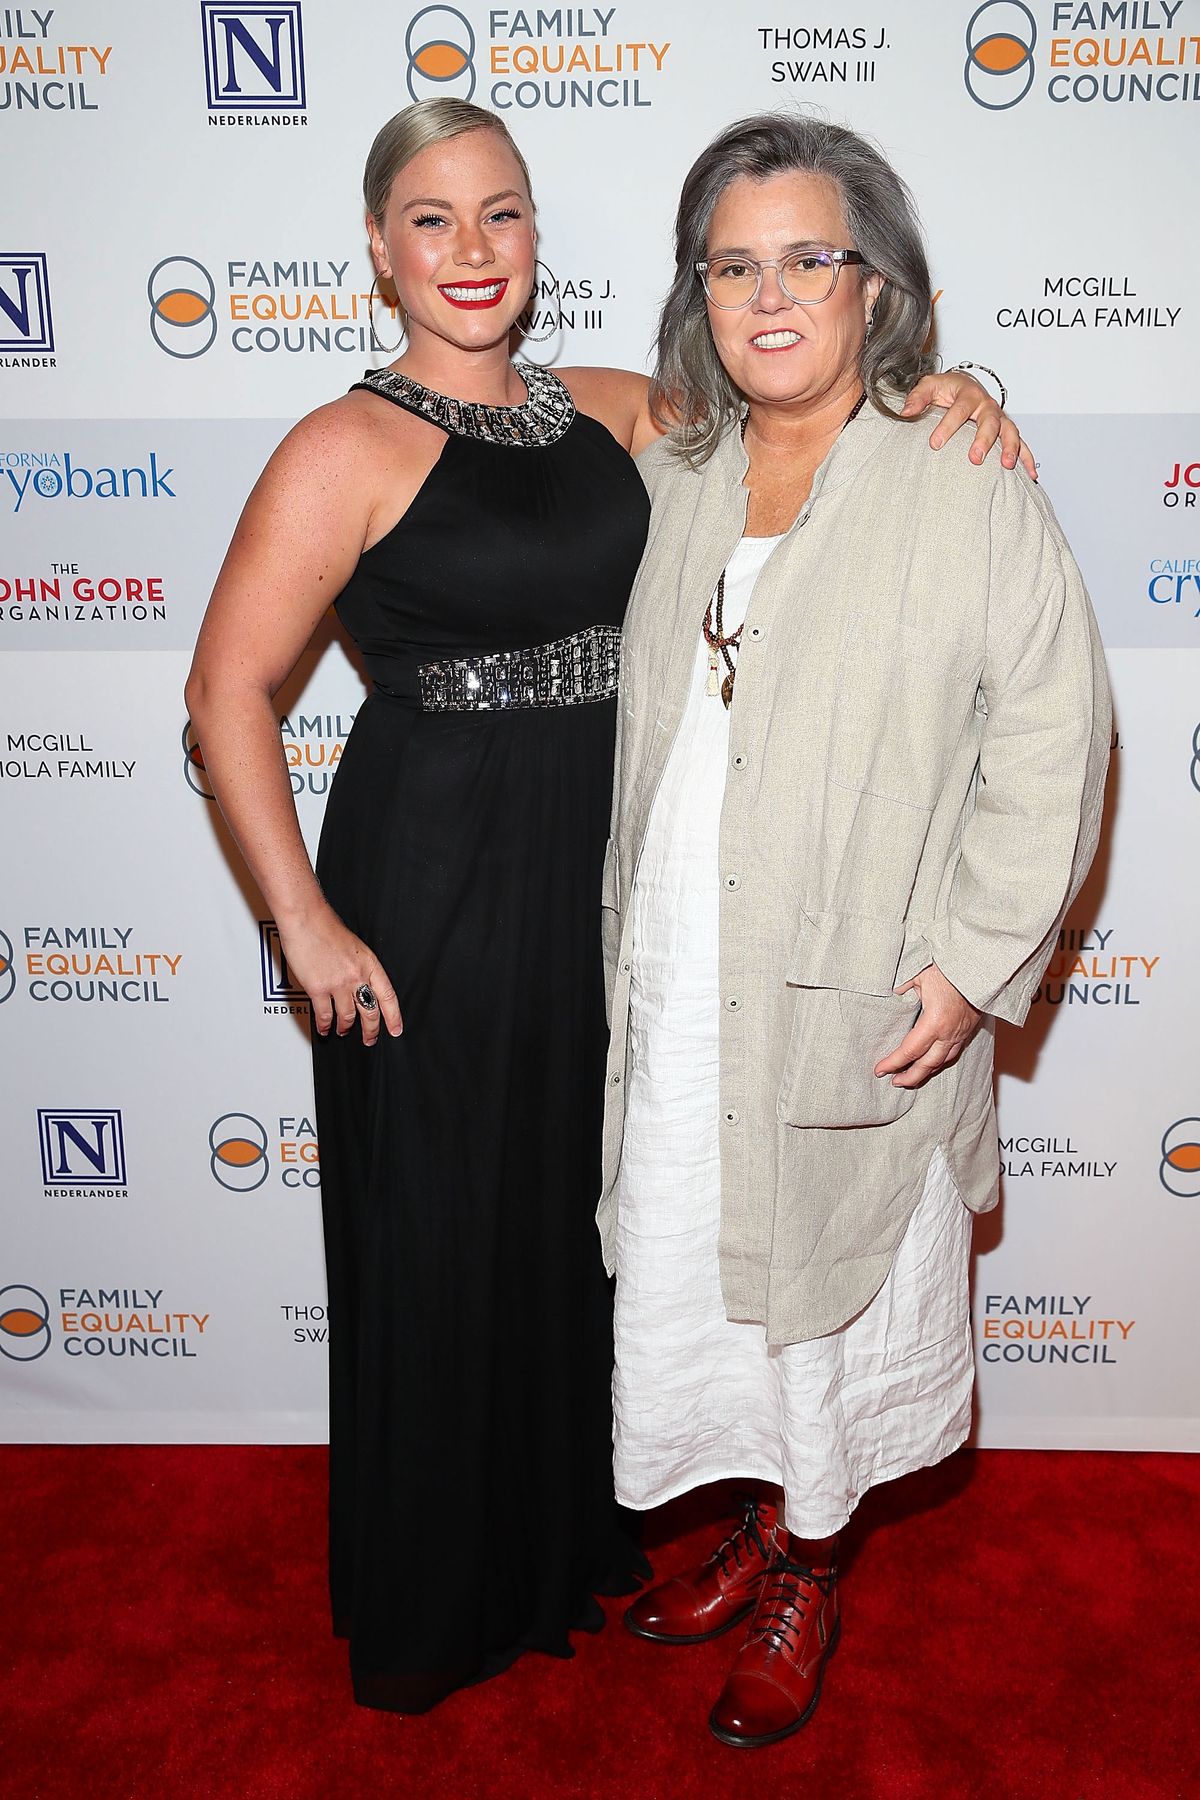 Rosie O'Donnell Announces Engagement